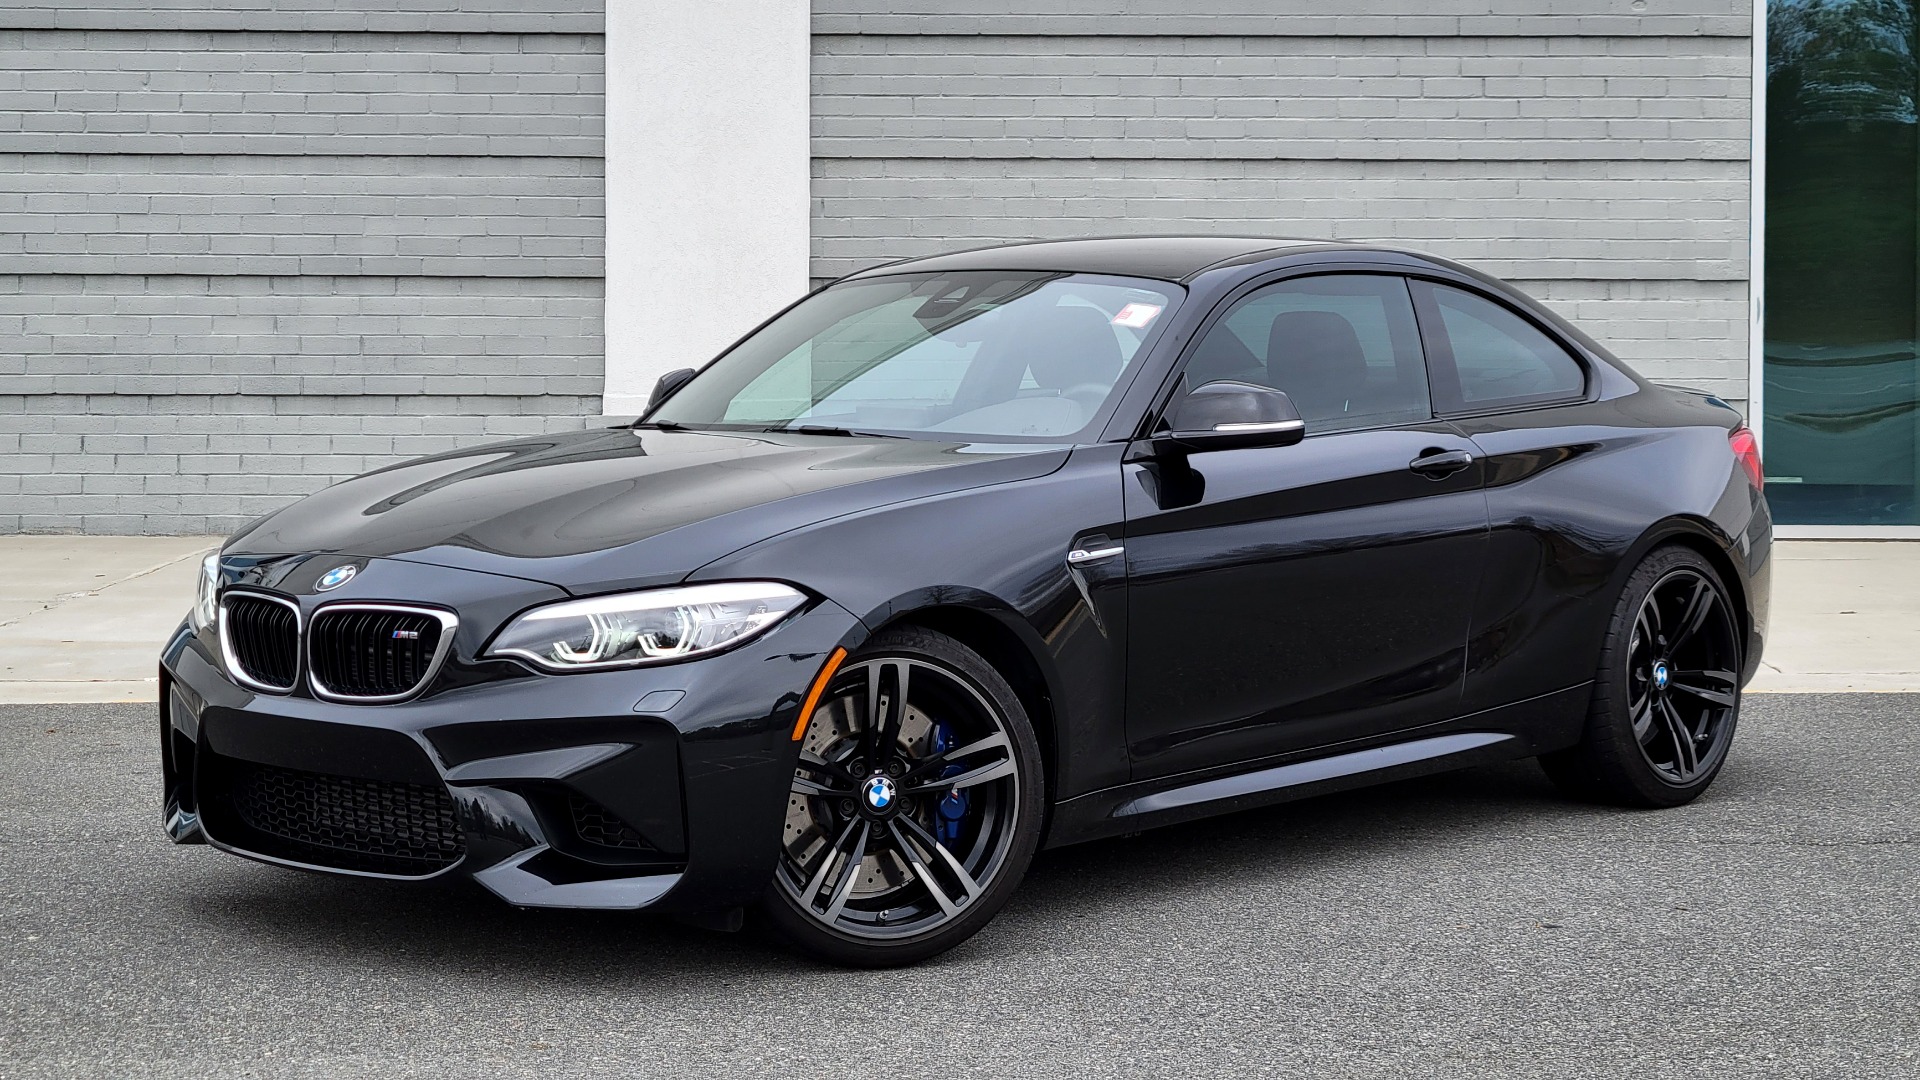 Used 2018 BMW M2 COUPE W/EXECUTIVE PKG / WIFI / H/K SND / PARK ASST / REARVIEW for sale Sold at Formula Imports in Charlotte NC 28227 1